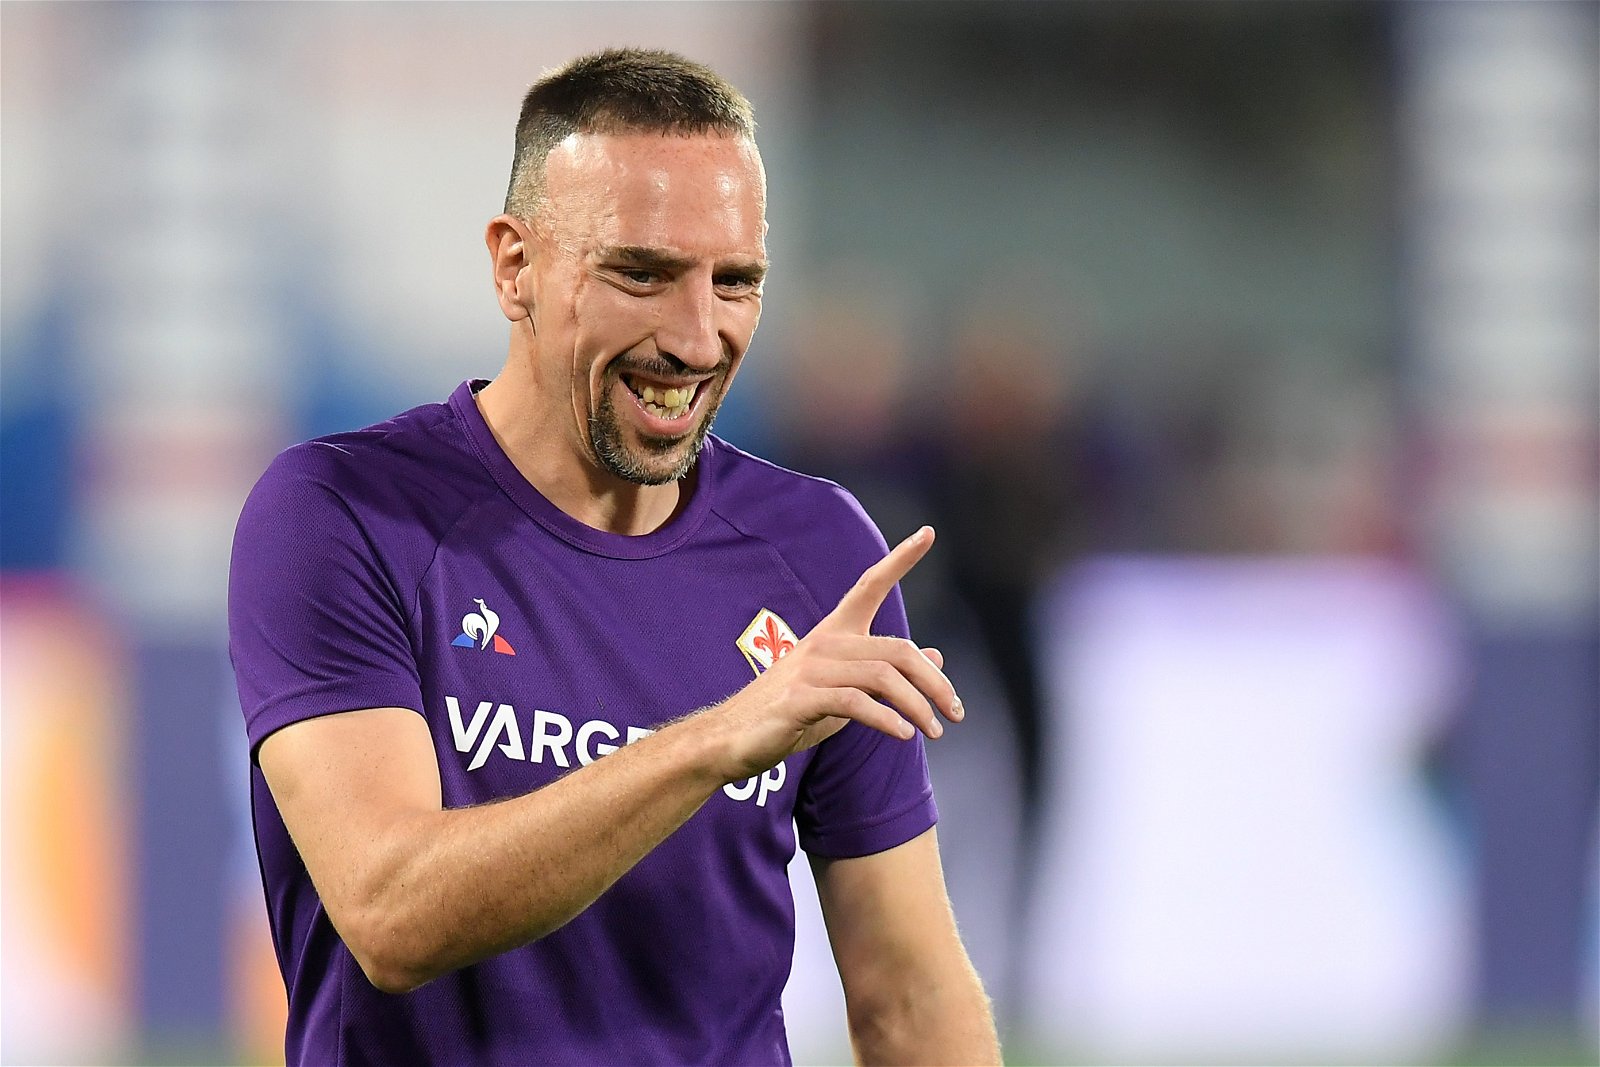 Fiorentina winger Franck Ribery set to miss 10 weeks after ankle surgery